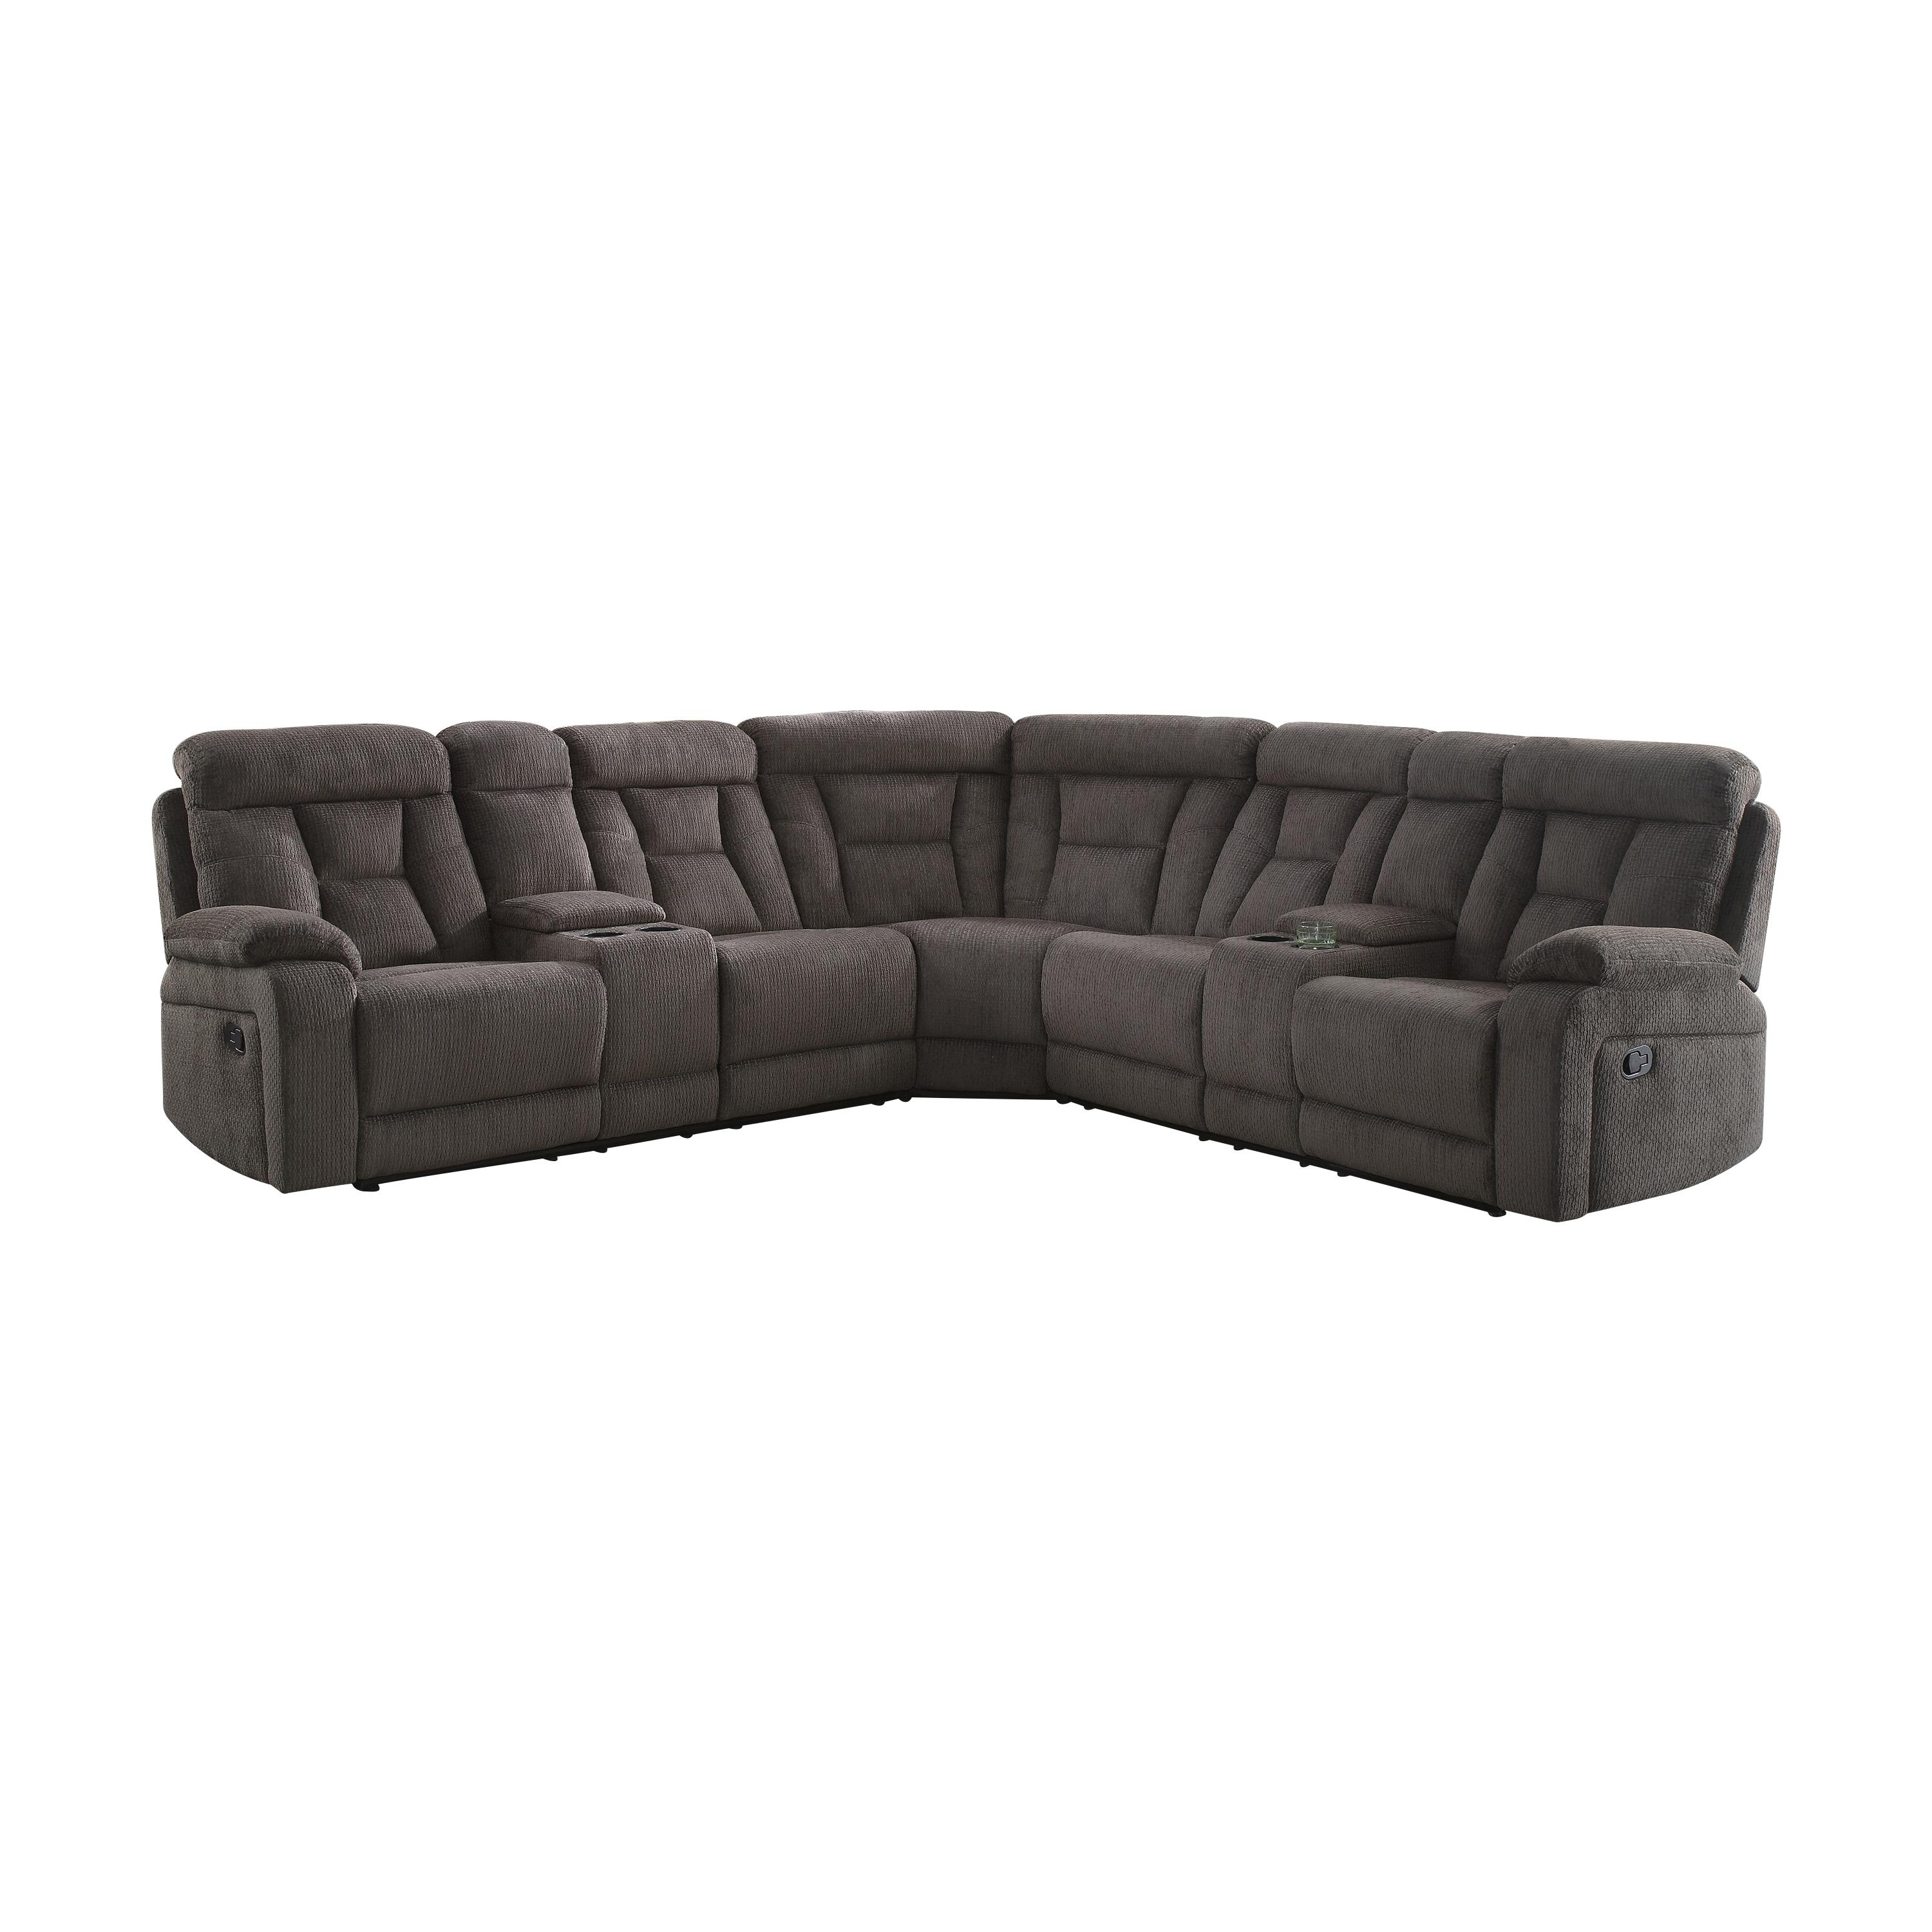 Modern Reclining Sectional 9914CH*SC Rosnay 9914CH*SC in Chocolate Chenille